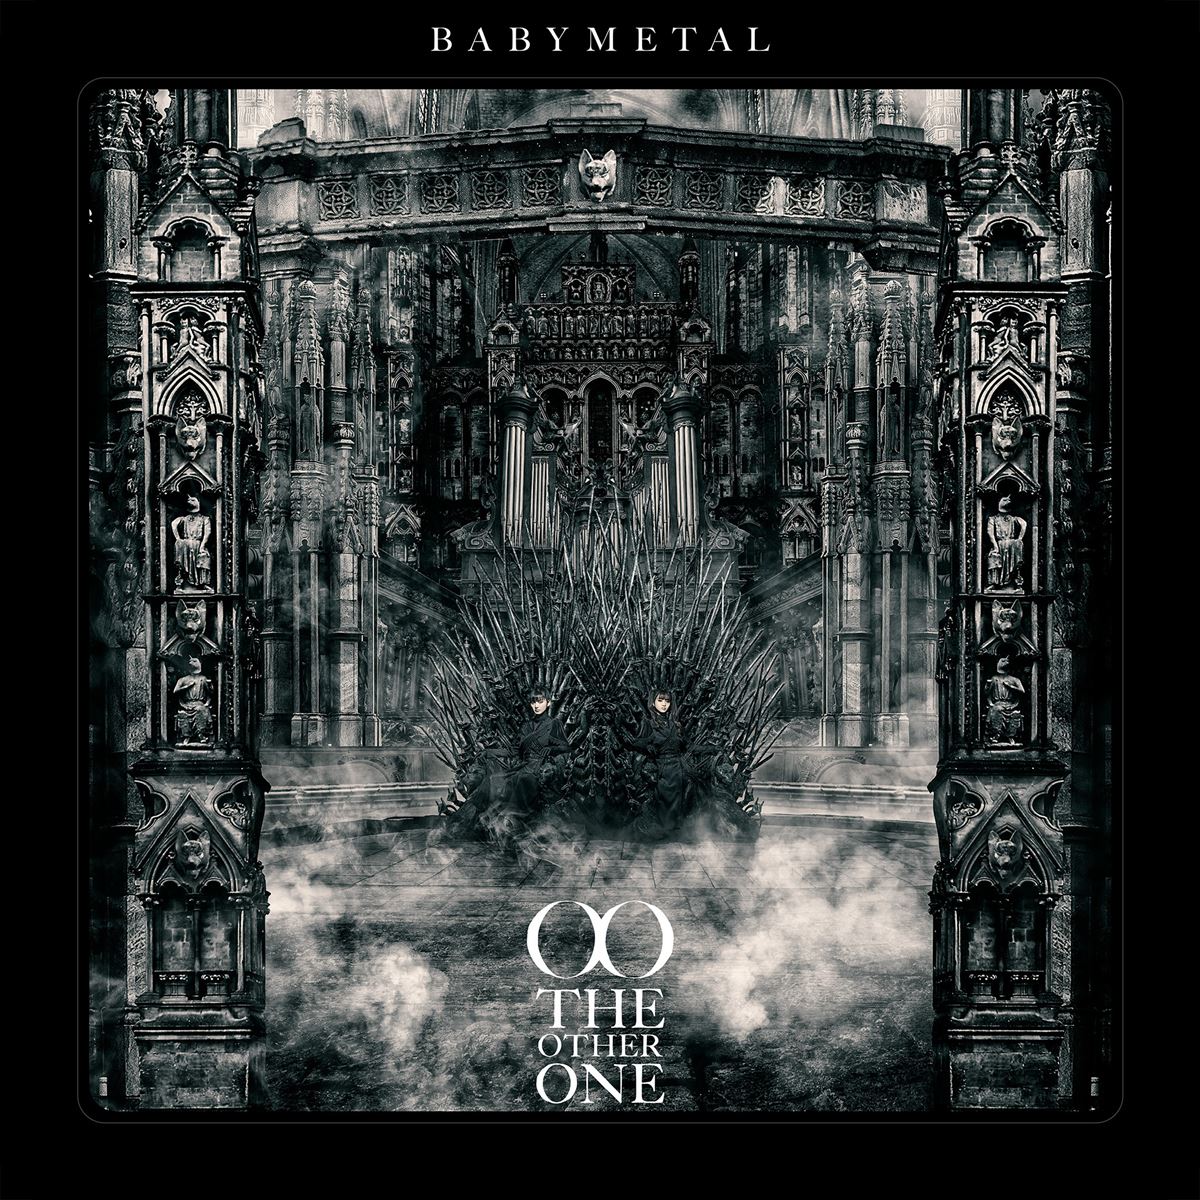 BABYMETAL、初のコンセプトアルバム『THE OTHER ONE』収録詳細